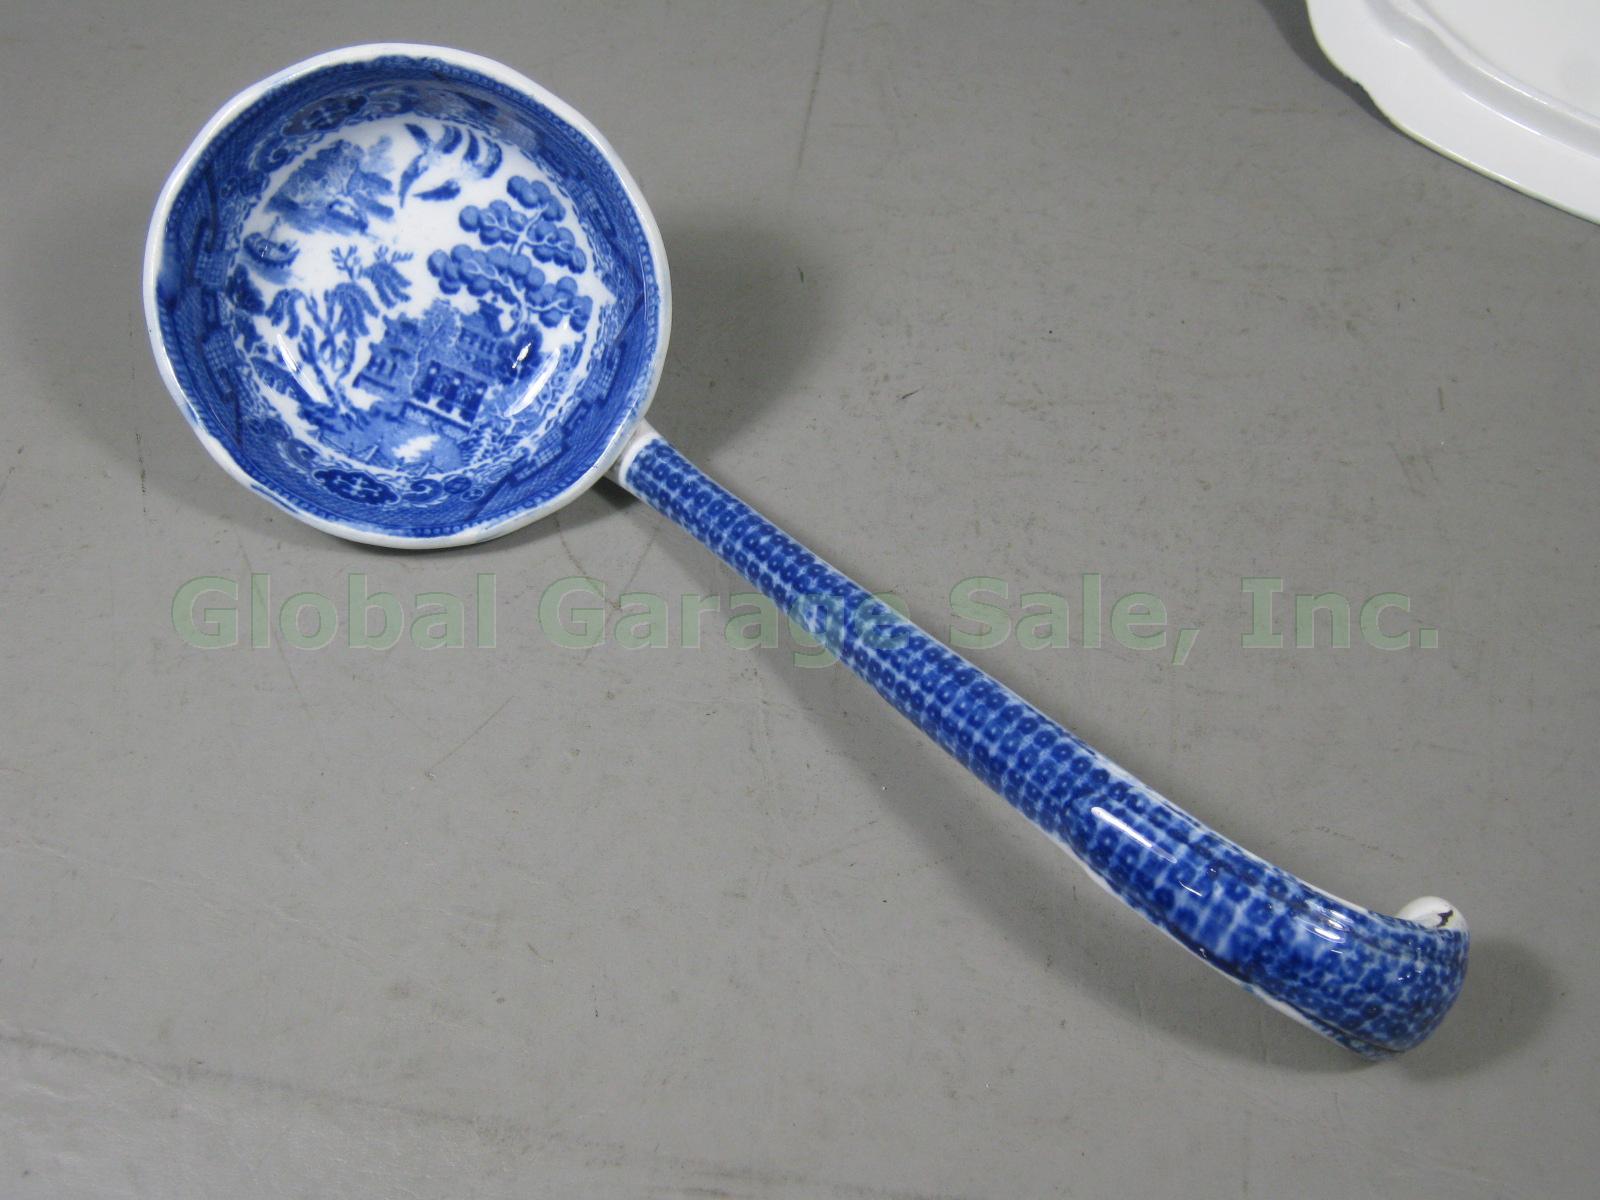 Antique Wedgwood Blue Willow 9" Soup Tureen + Ladle Transferware England EXC! NR 8